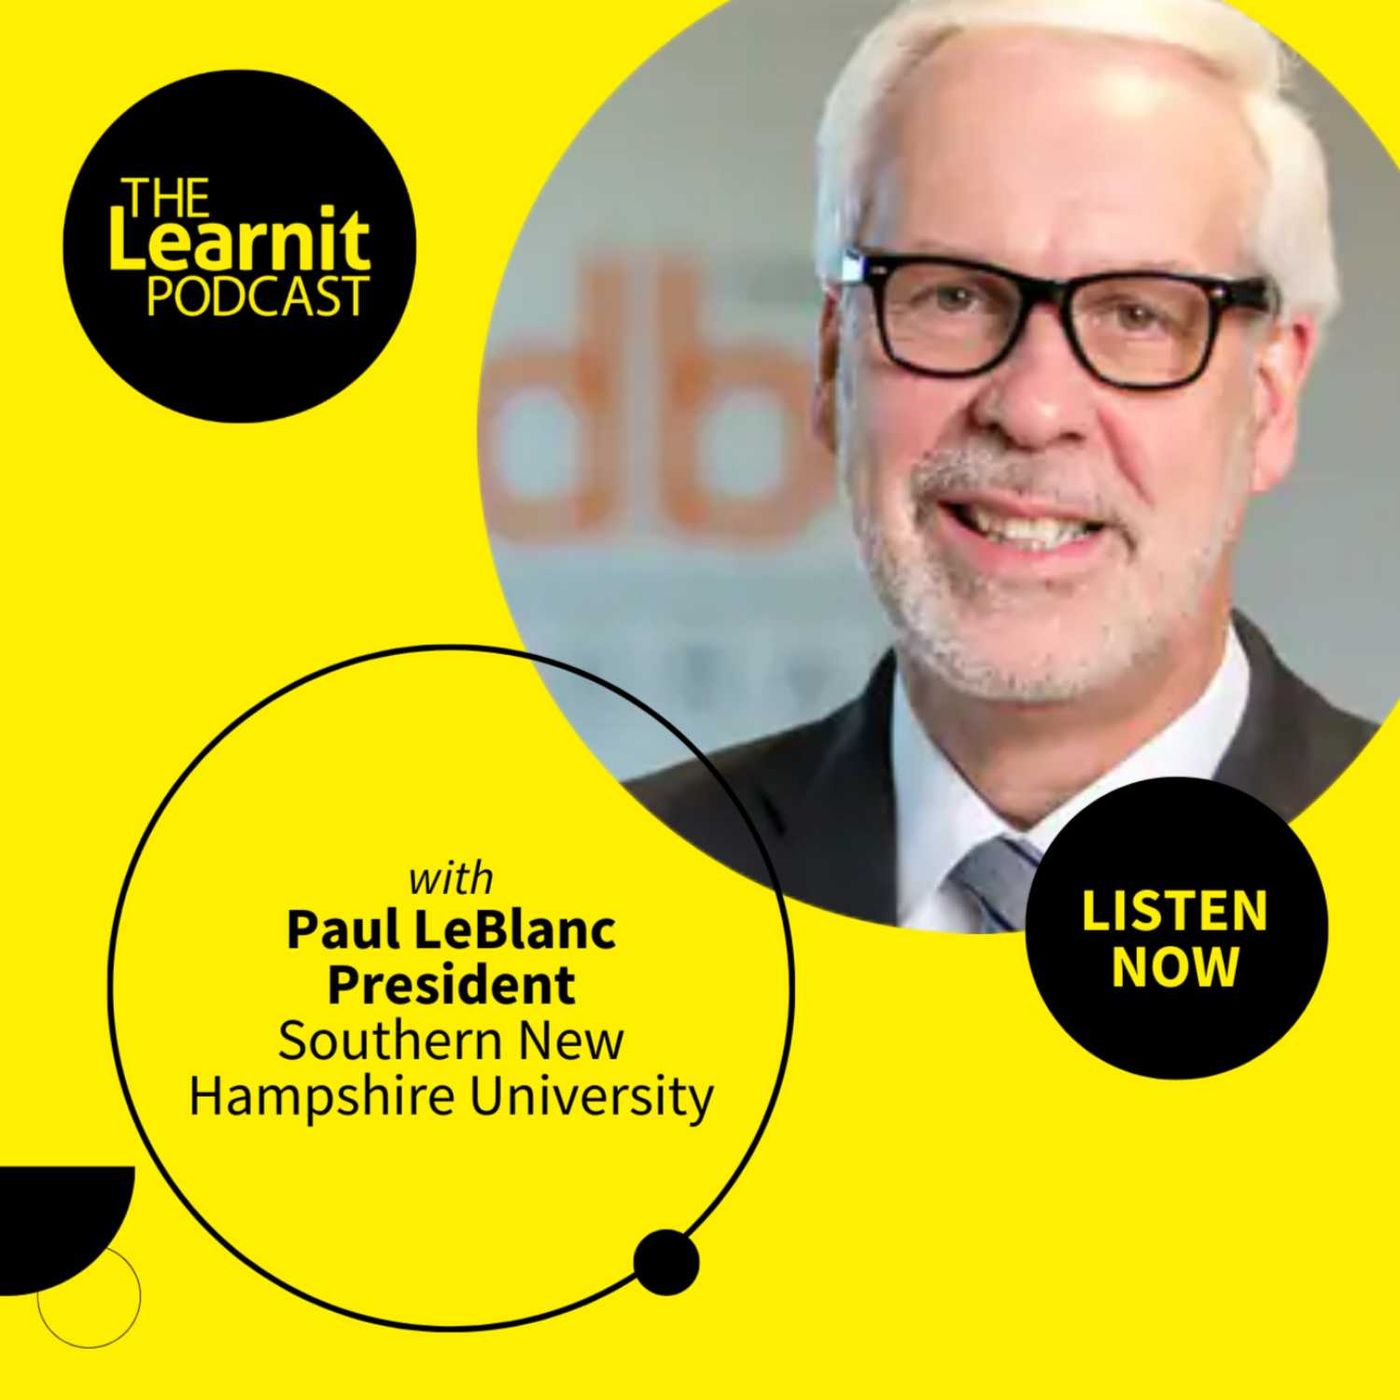 #54 Paul LeBlanc, President, Southern New Hampshire University: Power of love to transform lives at scale